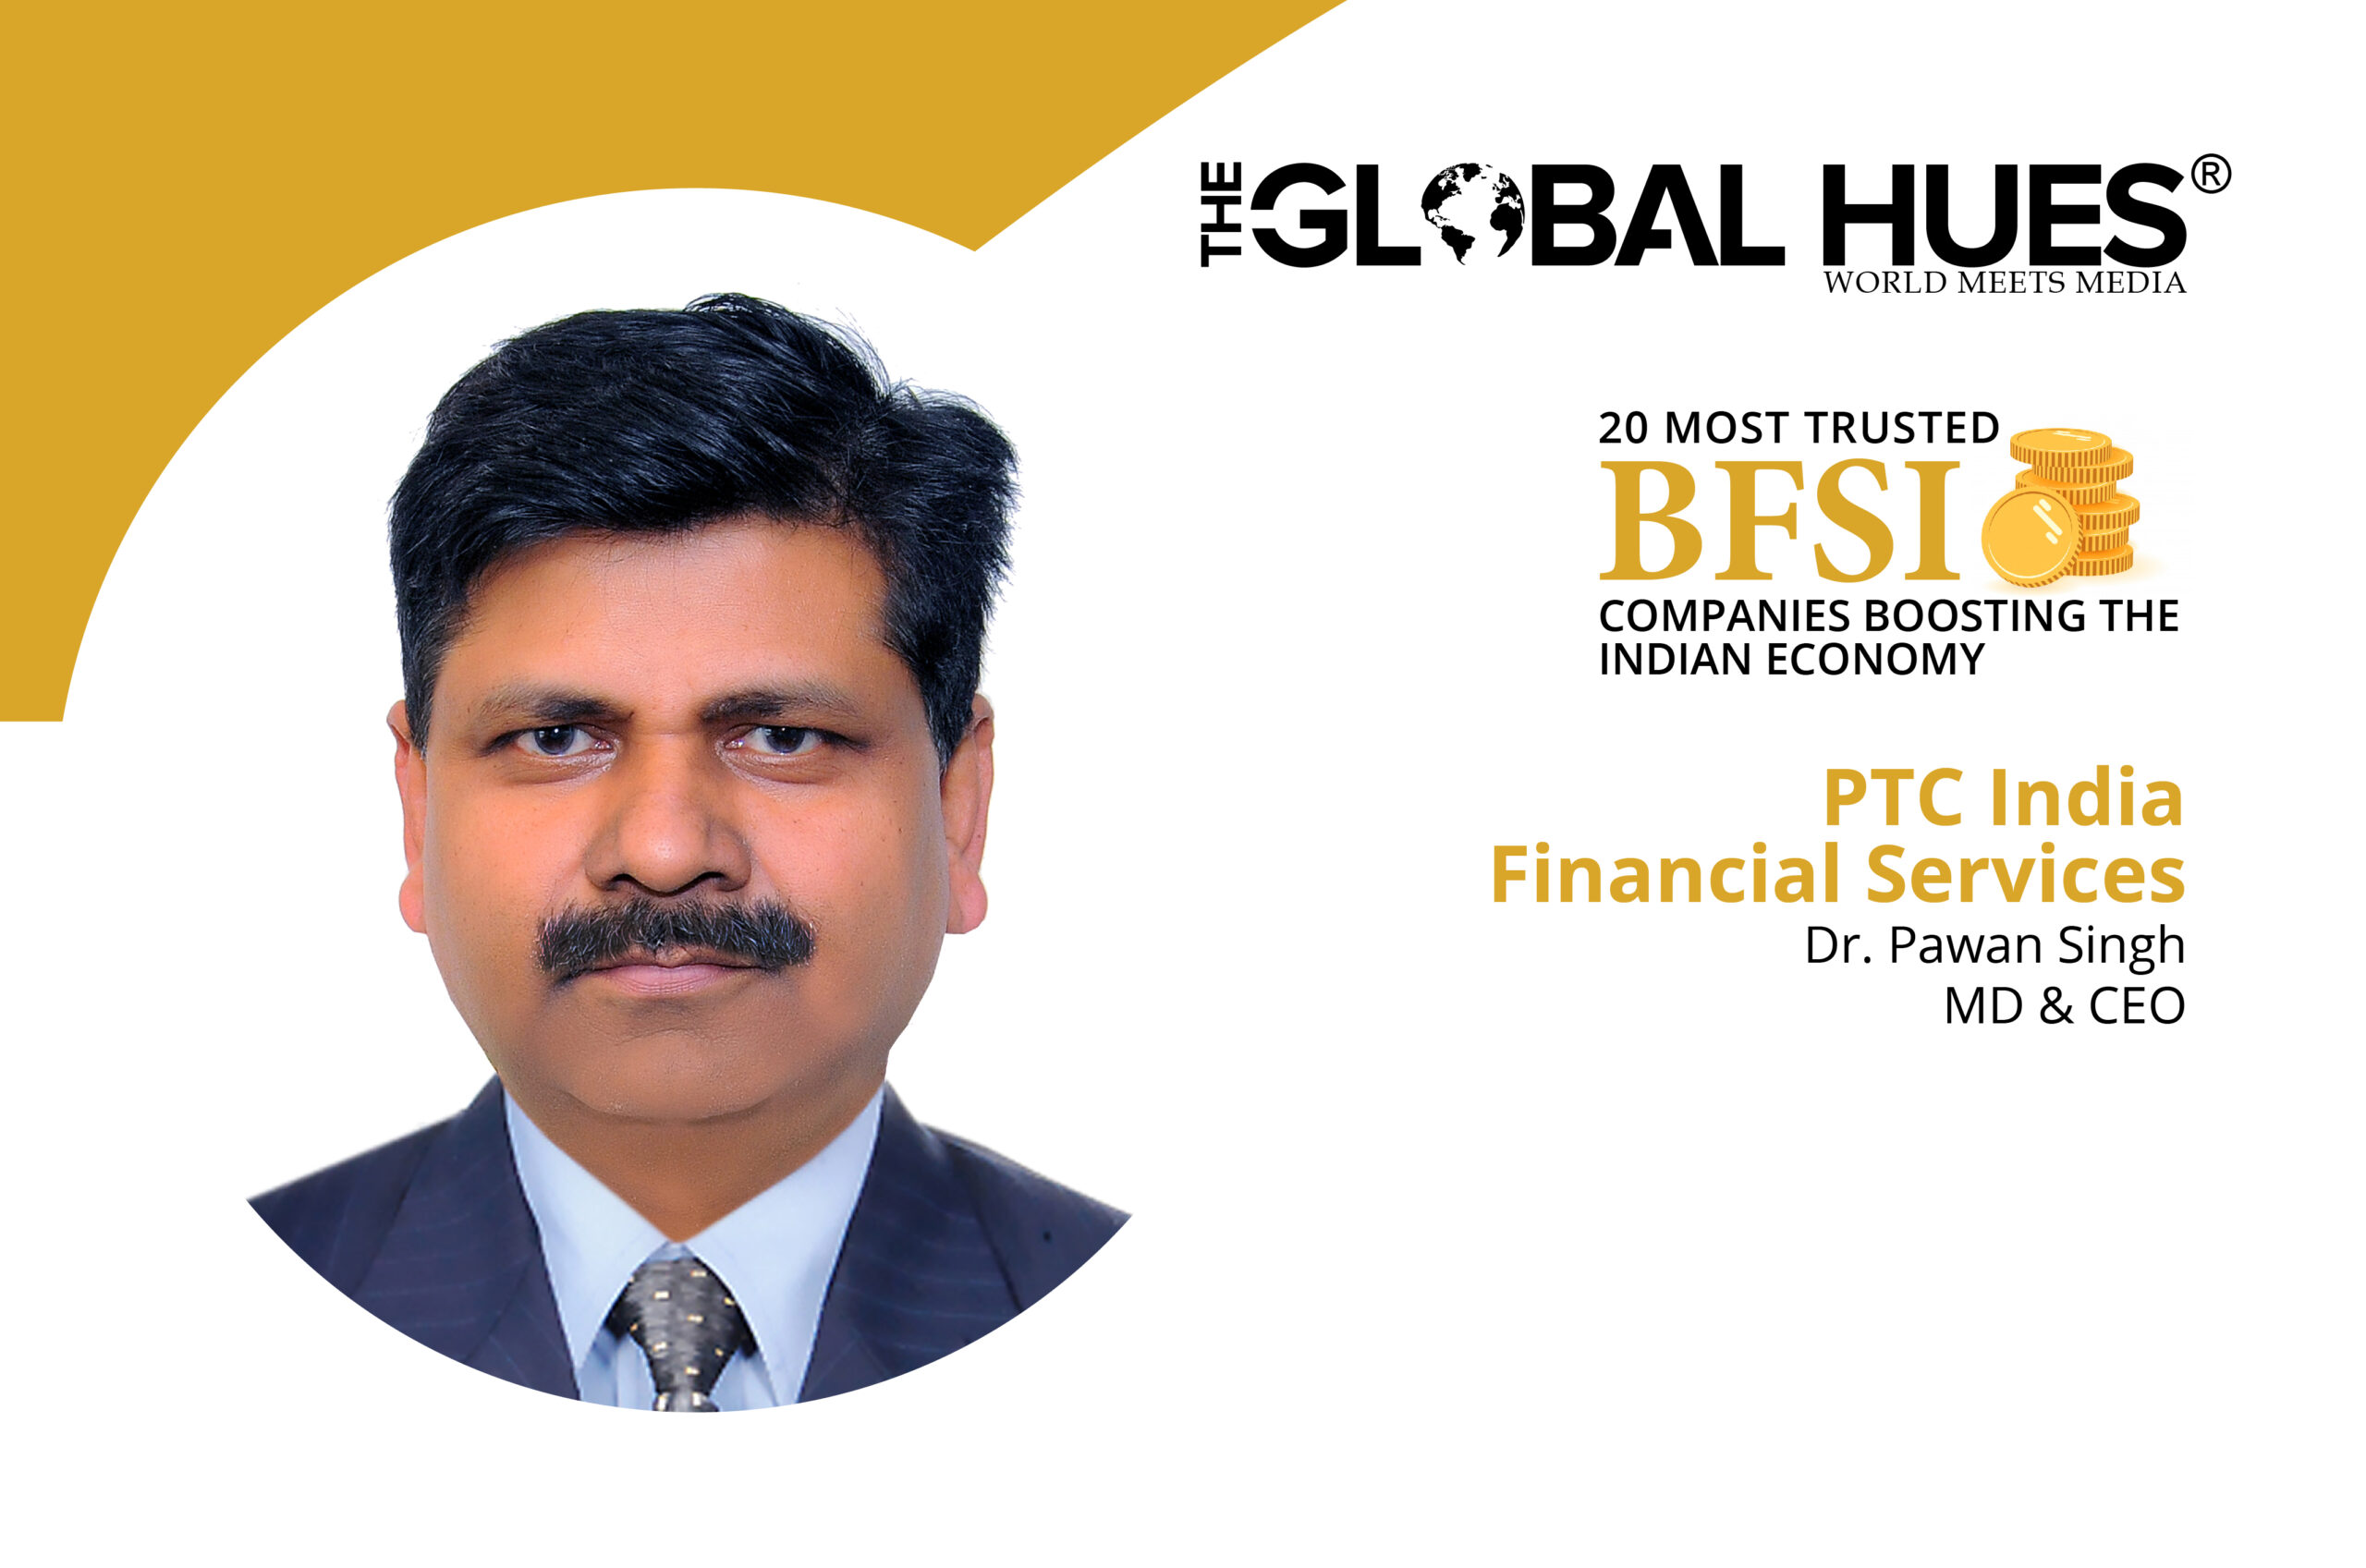 PTC India Financial Services Limited: Expert in financing sustainable Infrastructure sectors